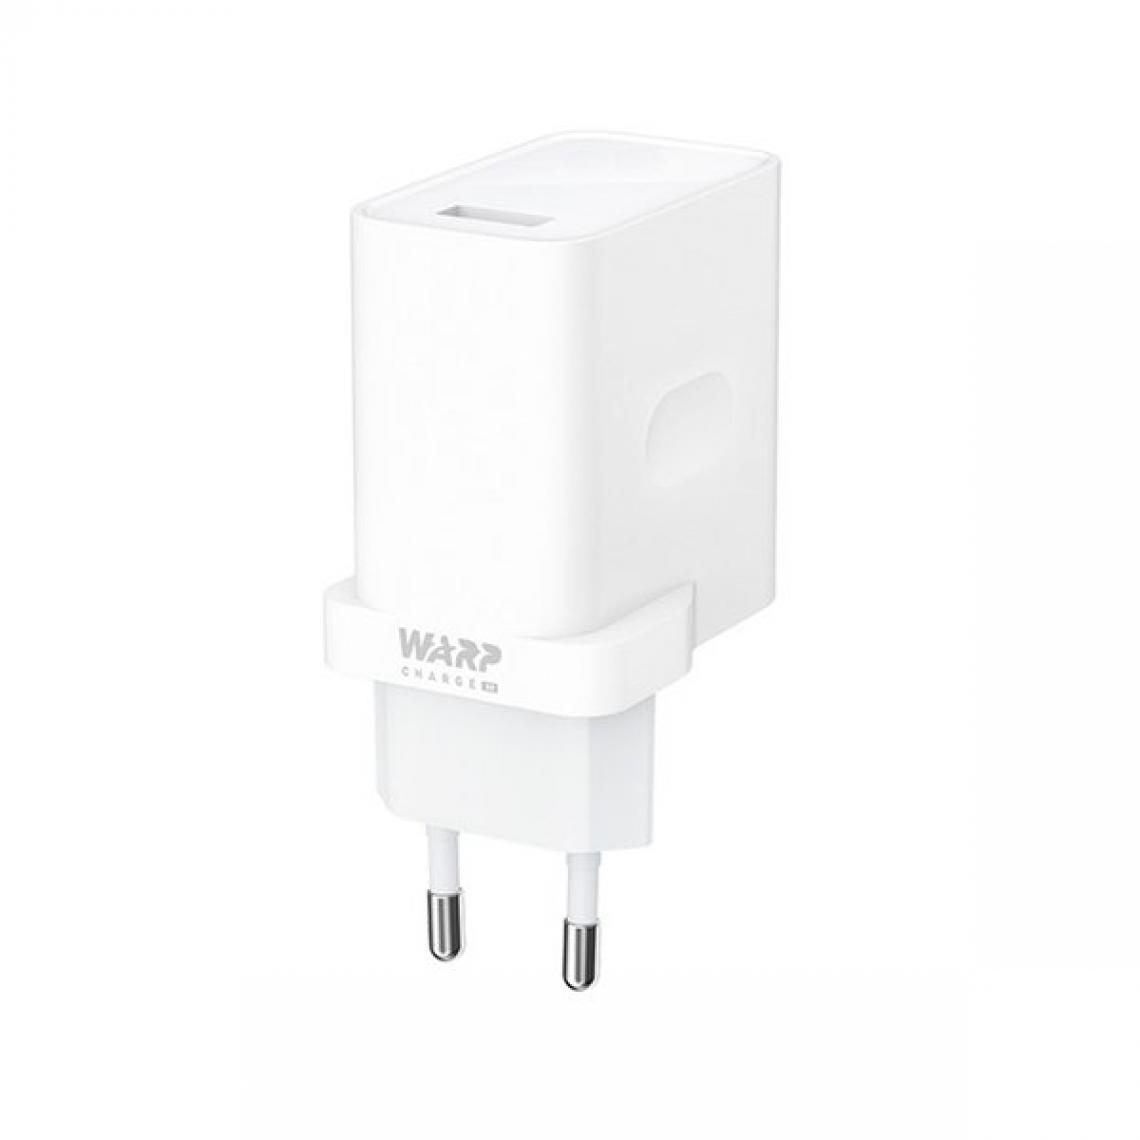 Phonecare - Chargeur Warp Charge 30 Fast Charge Power Adapter pour OnePlus 9 - Autres accessoires smartphone